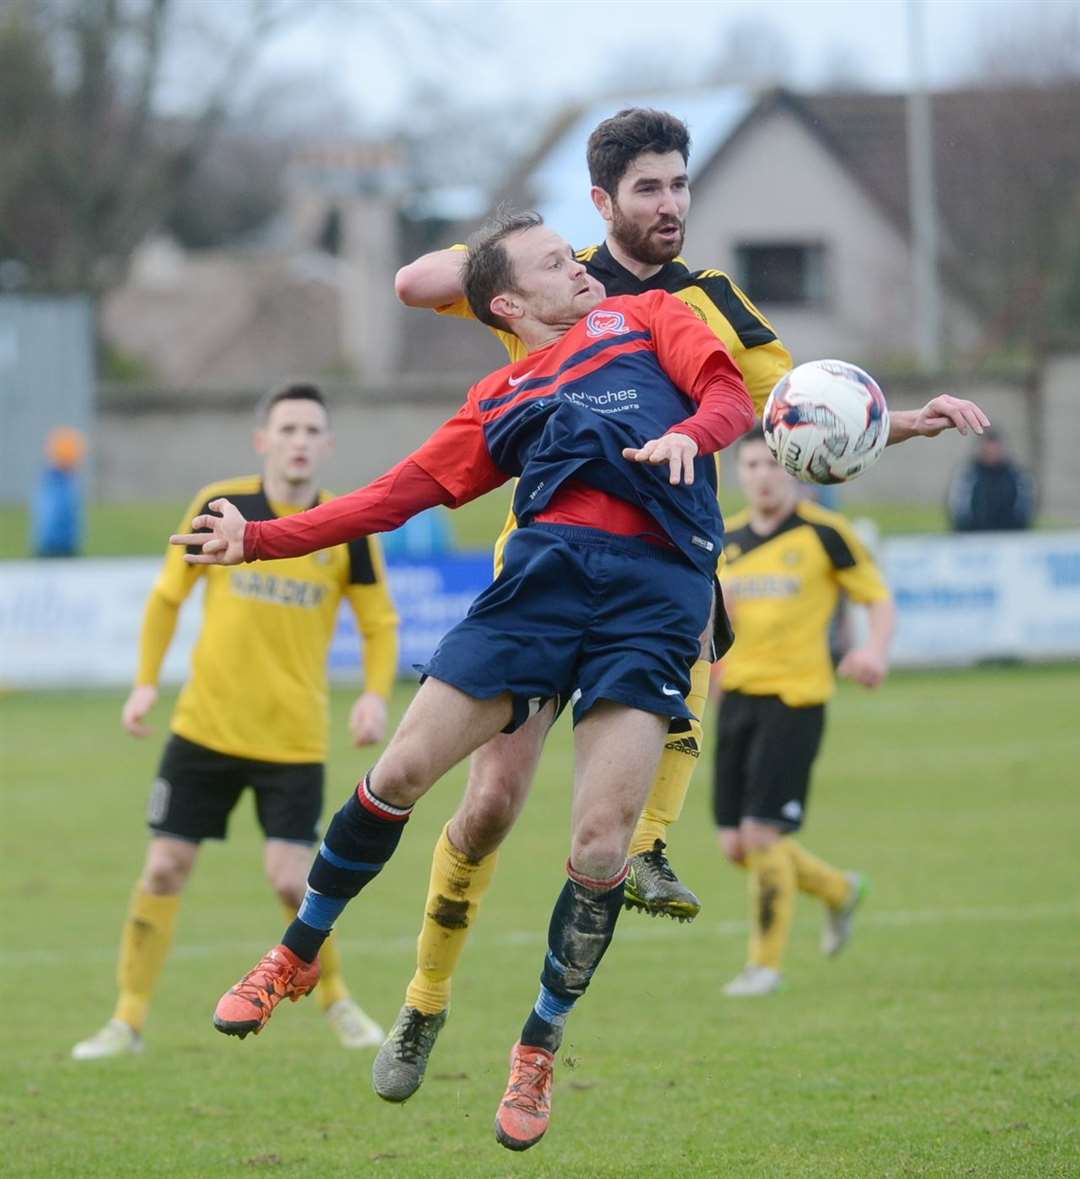 Callum Maclean (top) tussles with a Turriff United opponent. The experienced defender is relishing the season ahead.